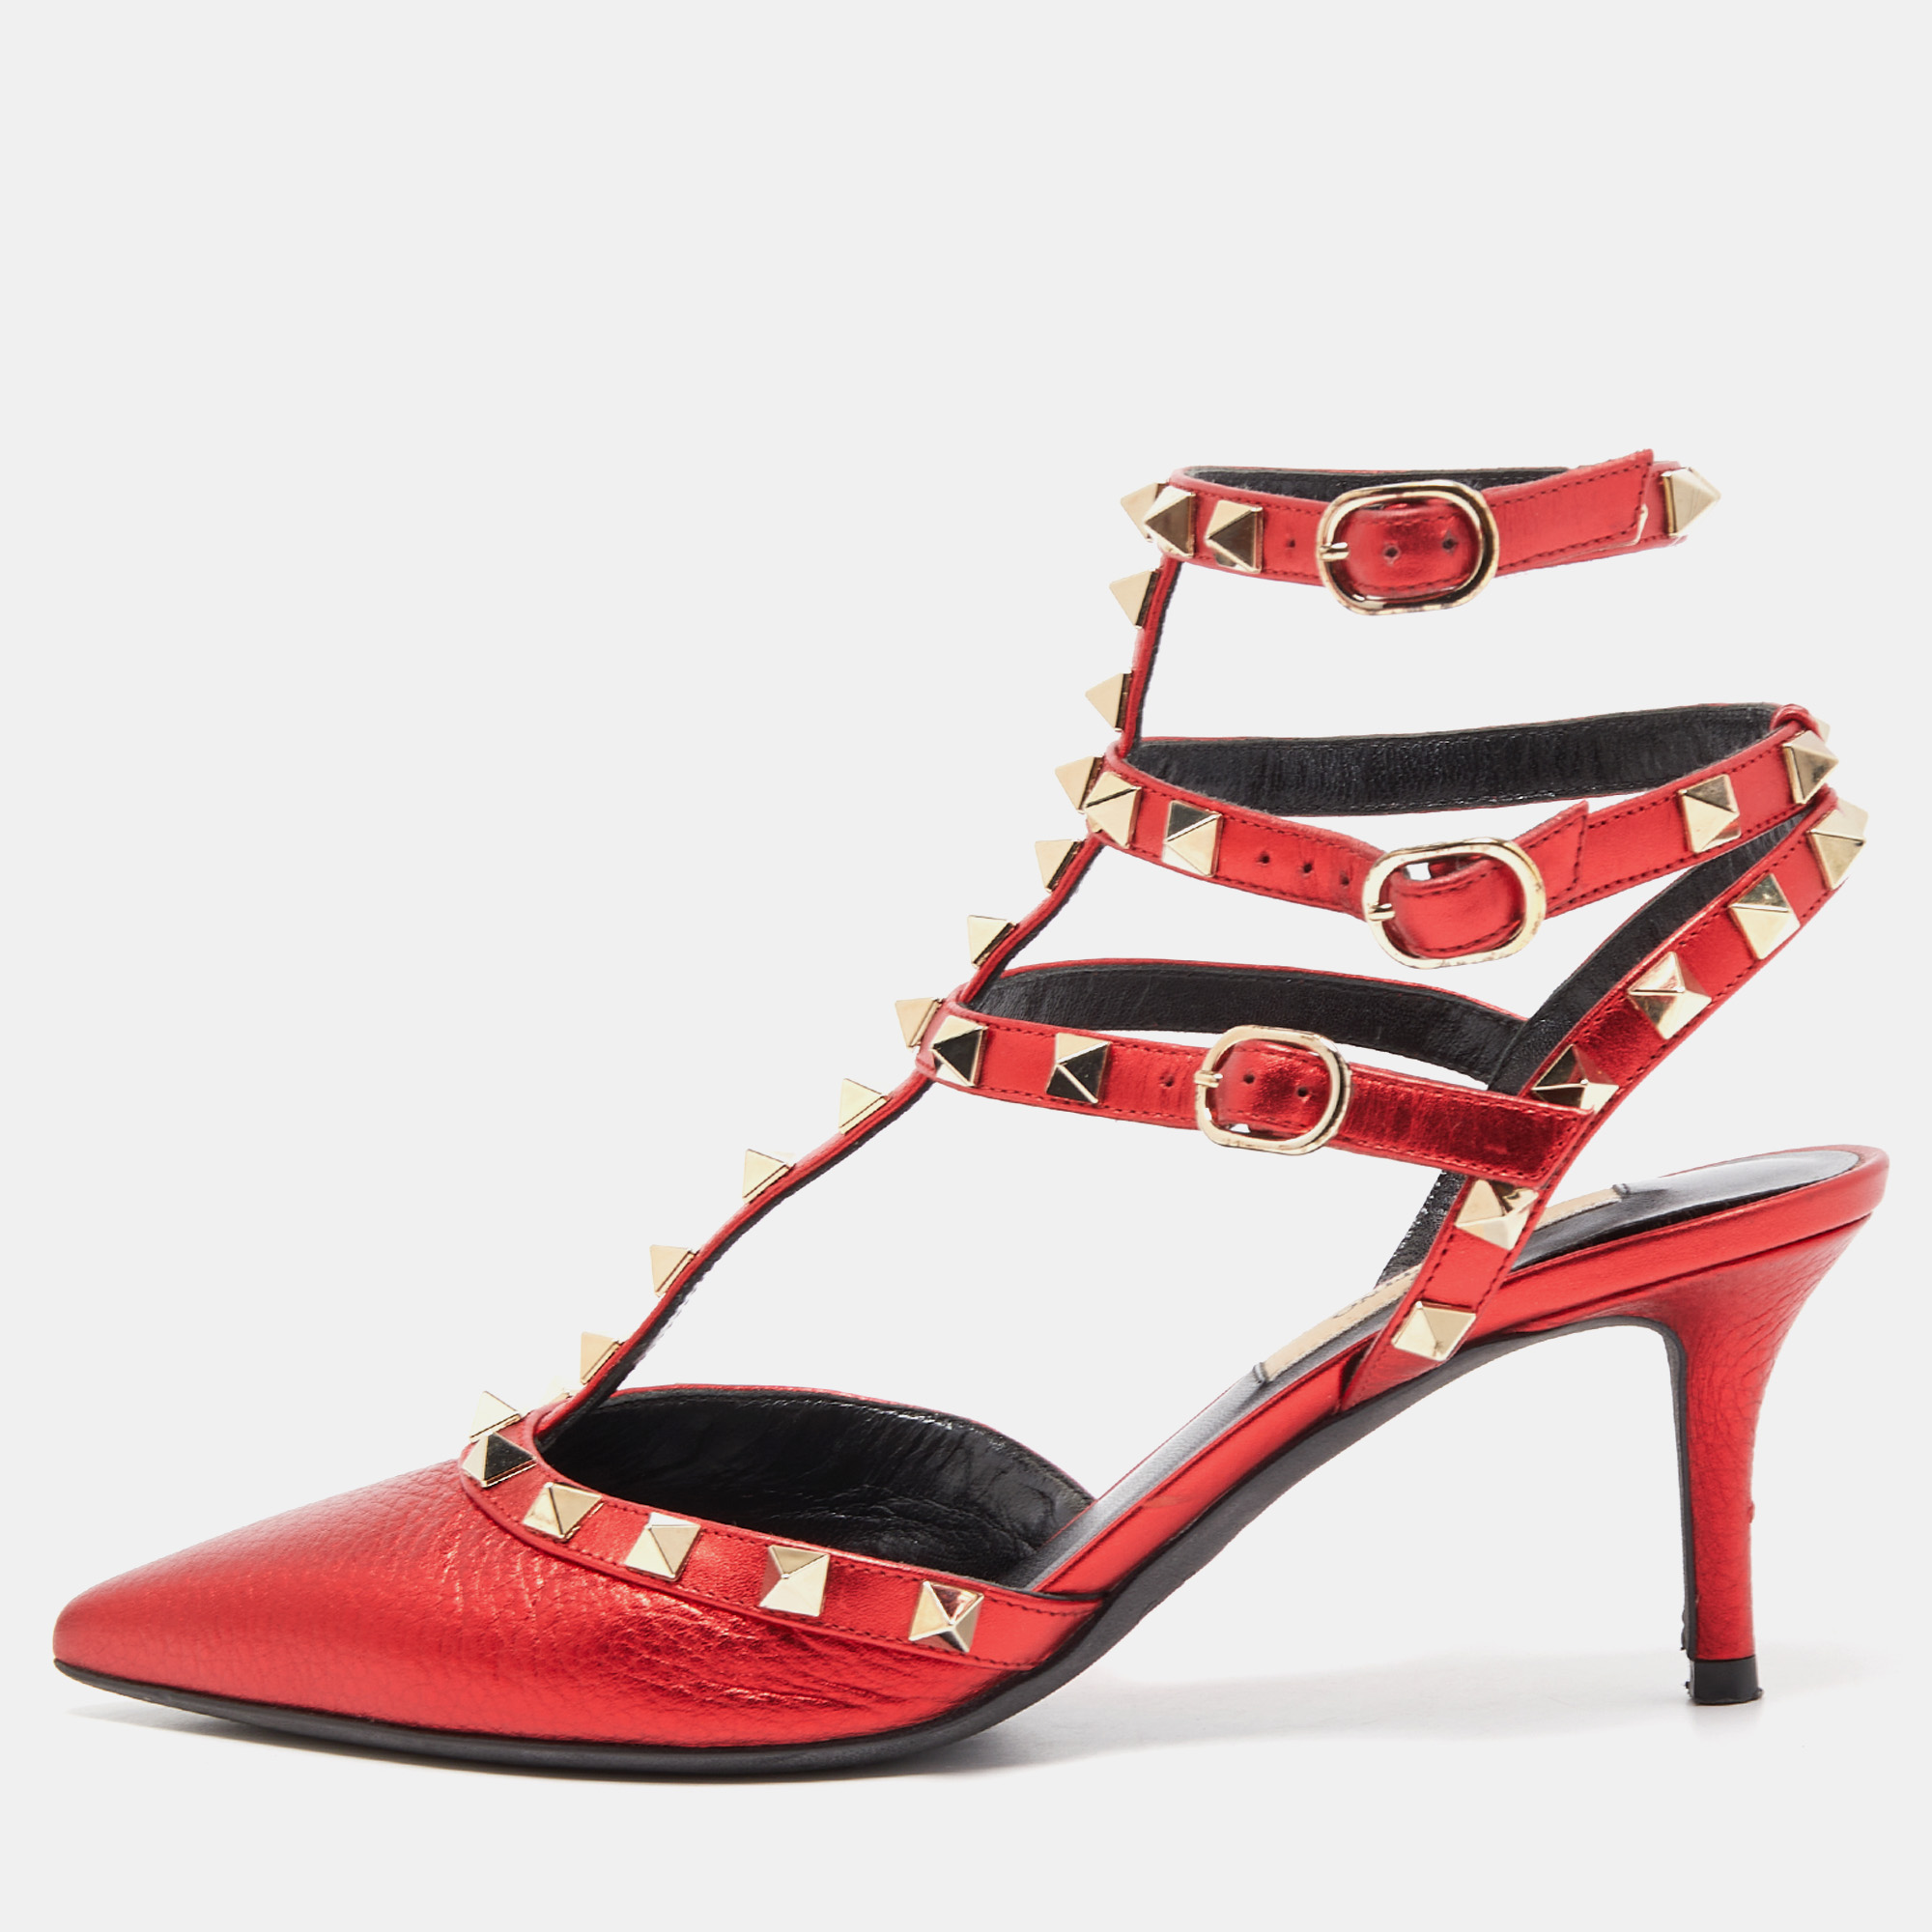 When considering Valentino three words come to mind: luxurious bold and iconic. These gorgeous shoes are crafted from prime quality materials and the sleek silhouette is adorned with carefully placed Rockstuds. They can be styled with various outfits in your wardrobe.